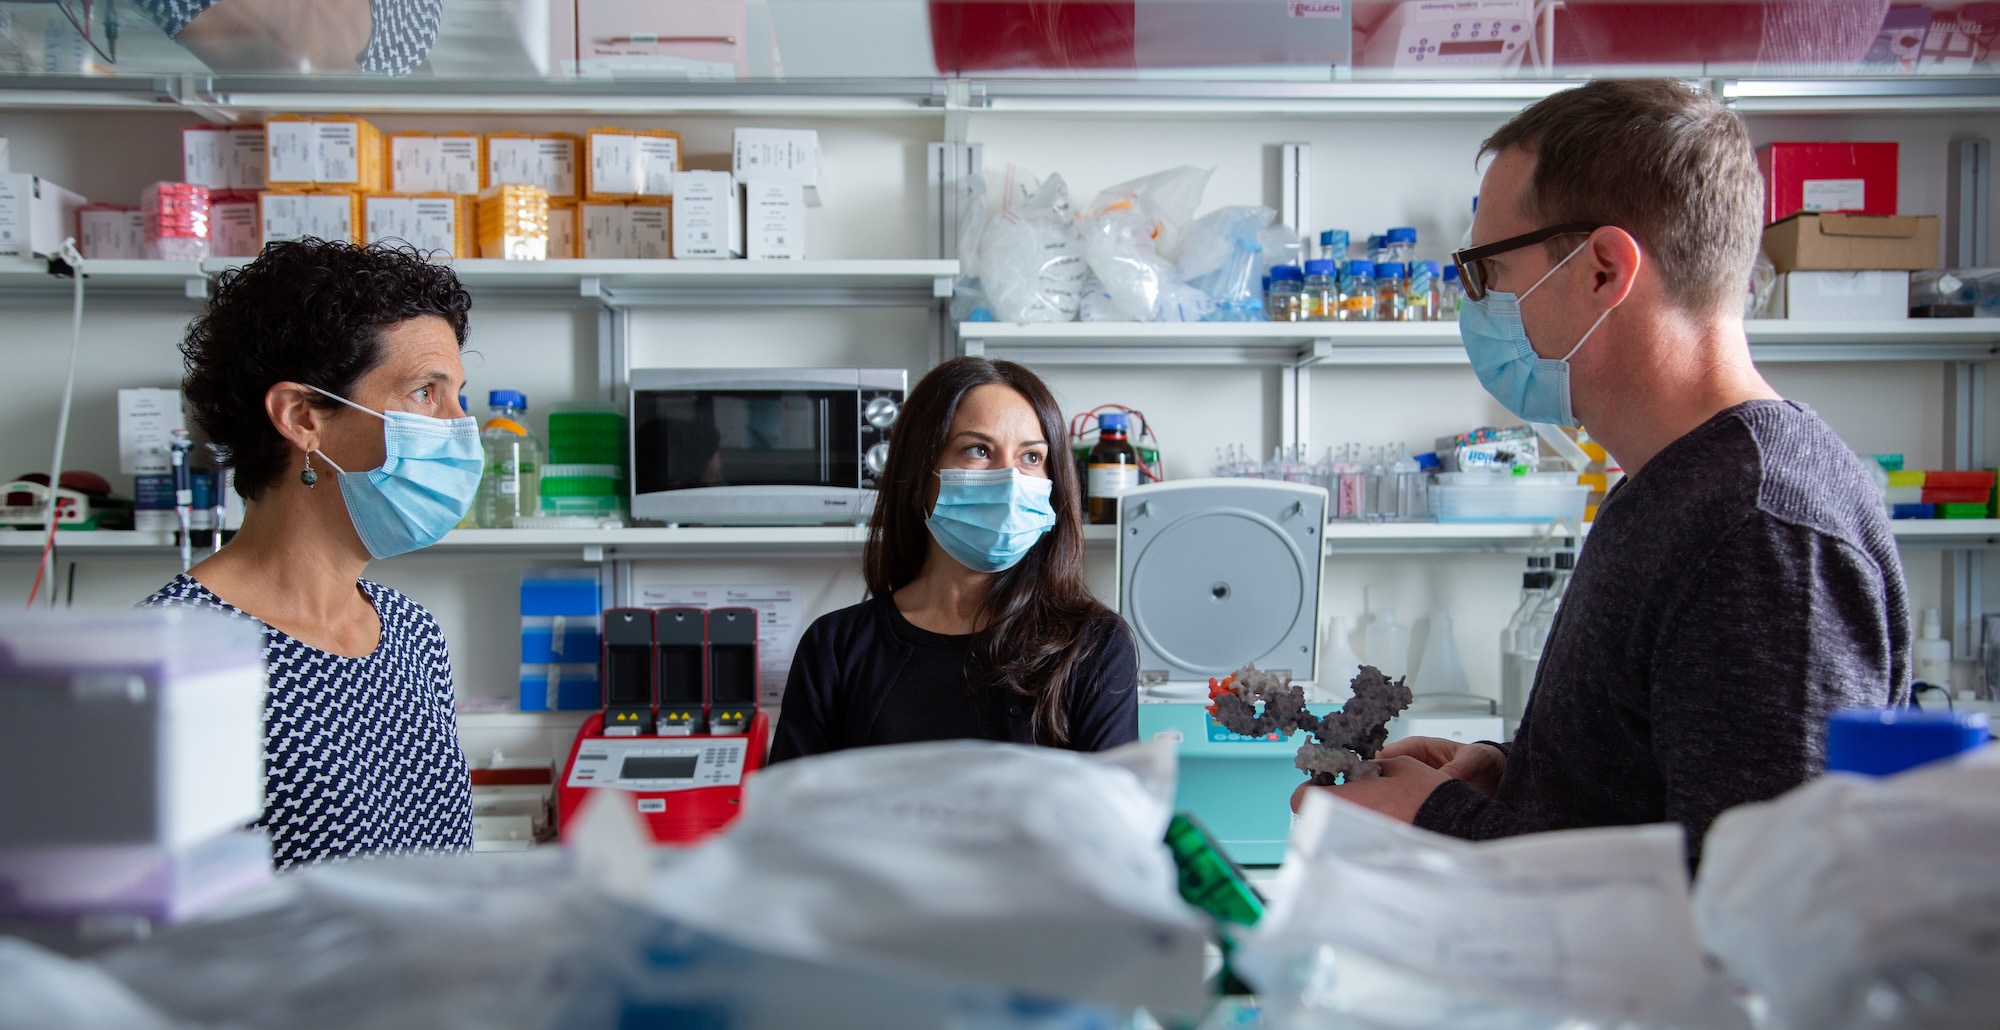 The researchers behind Basel spinout Cimeio standing in a lab. From left to right: Romina Matter-Marone, Rosalba Lepore and Lukas Jeker.